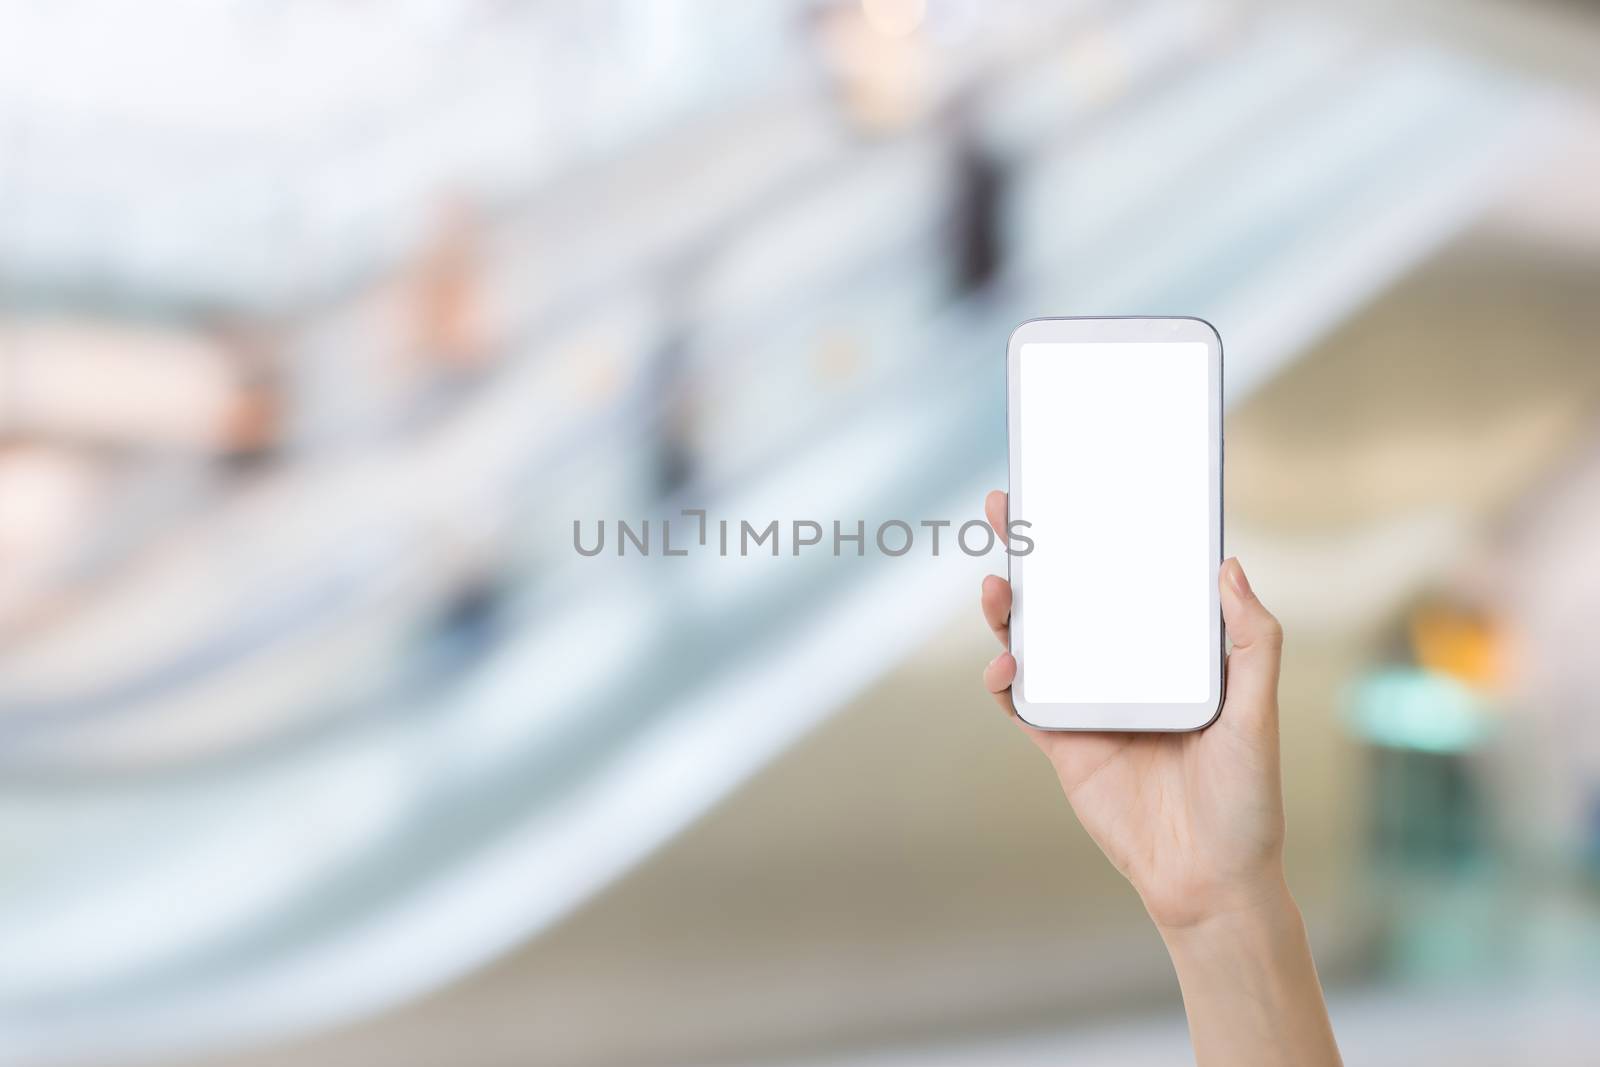 Using smartphone in a market or department store, closeup image.